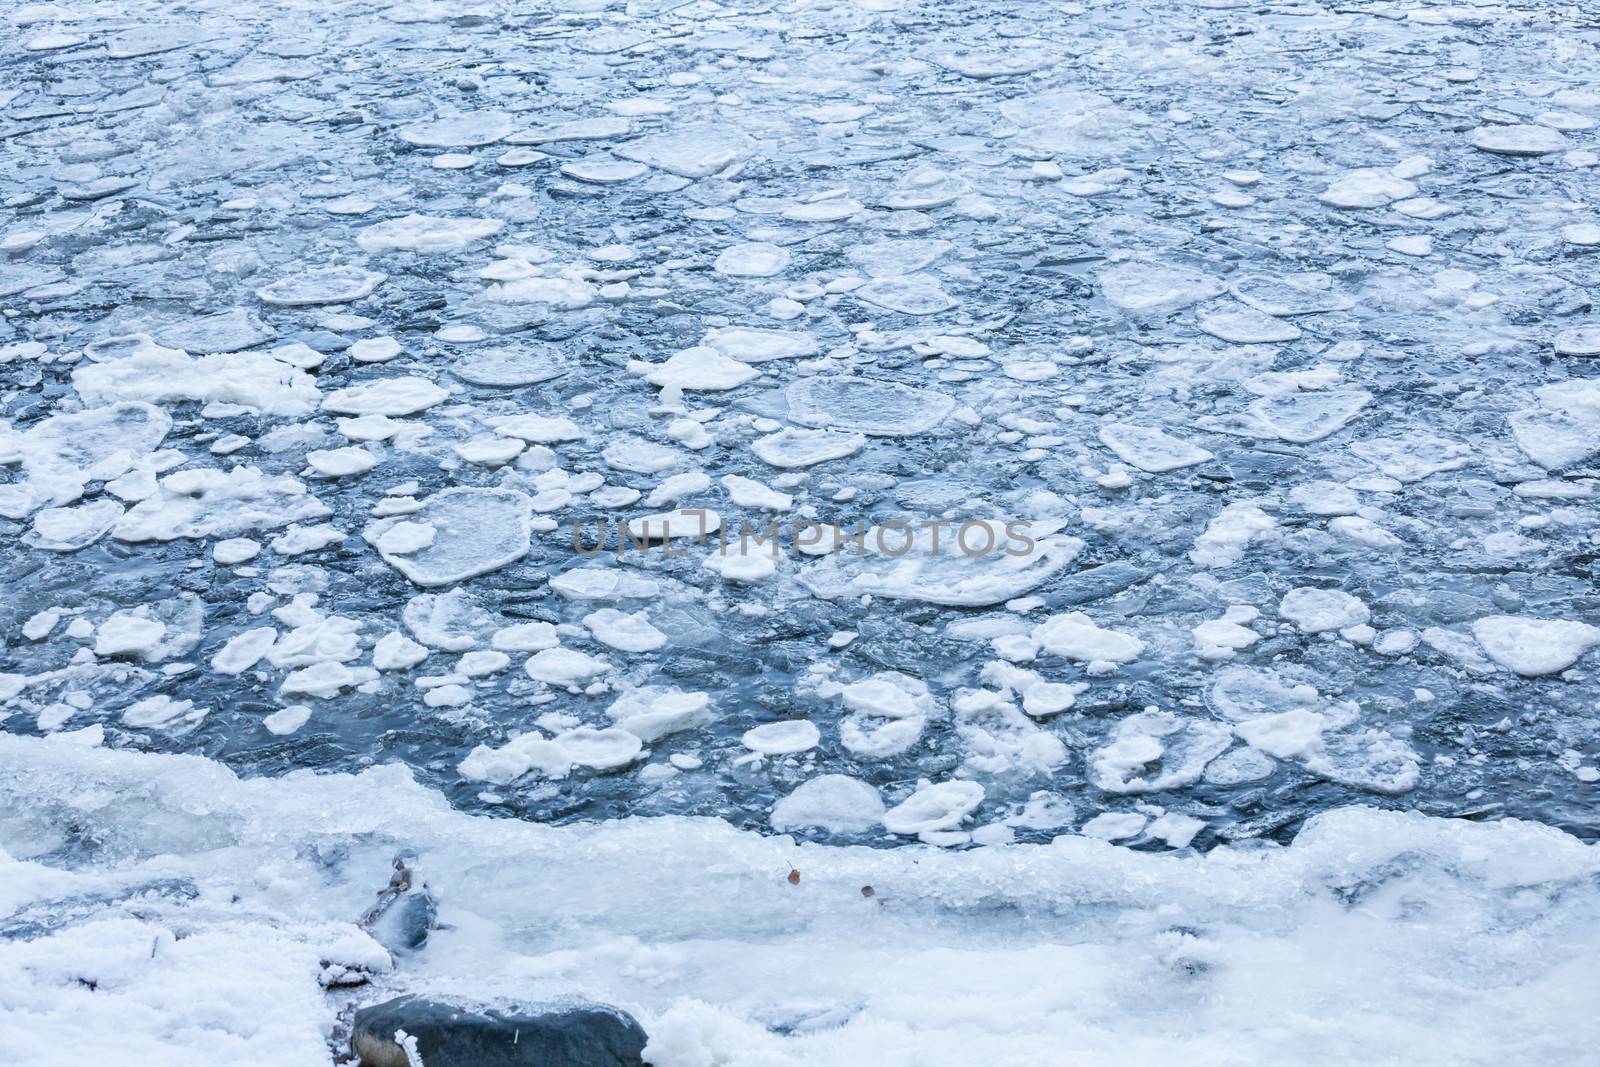 Ice pieces in a lake by juhku